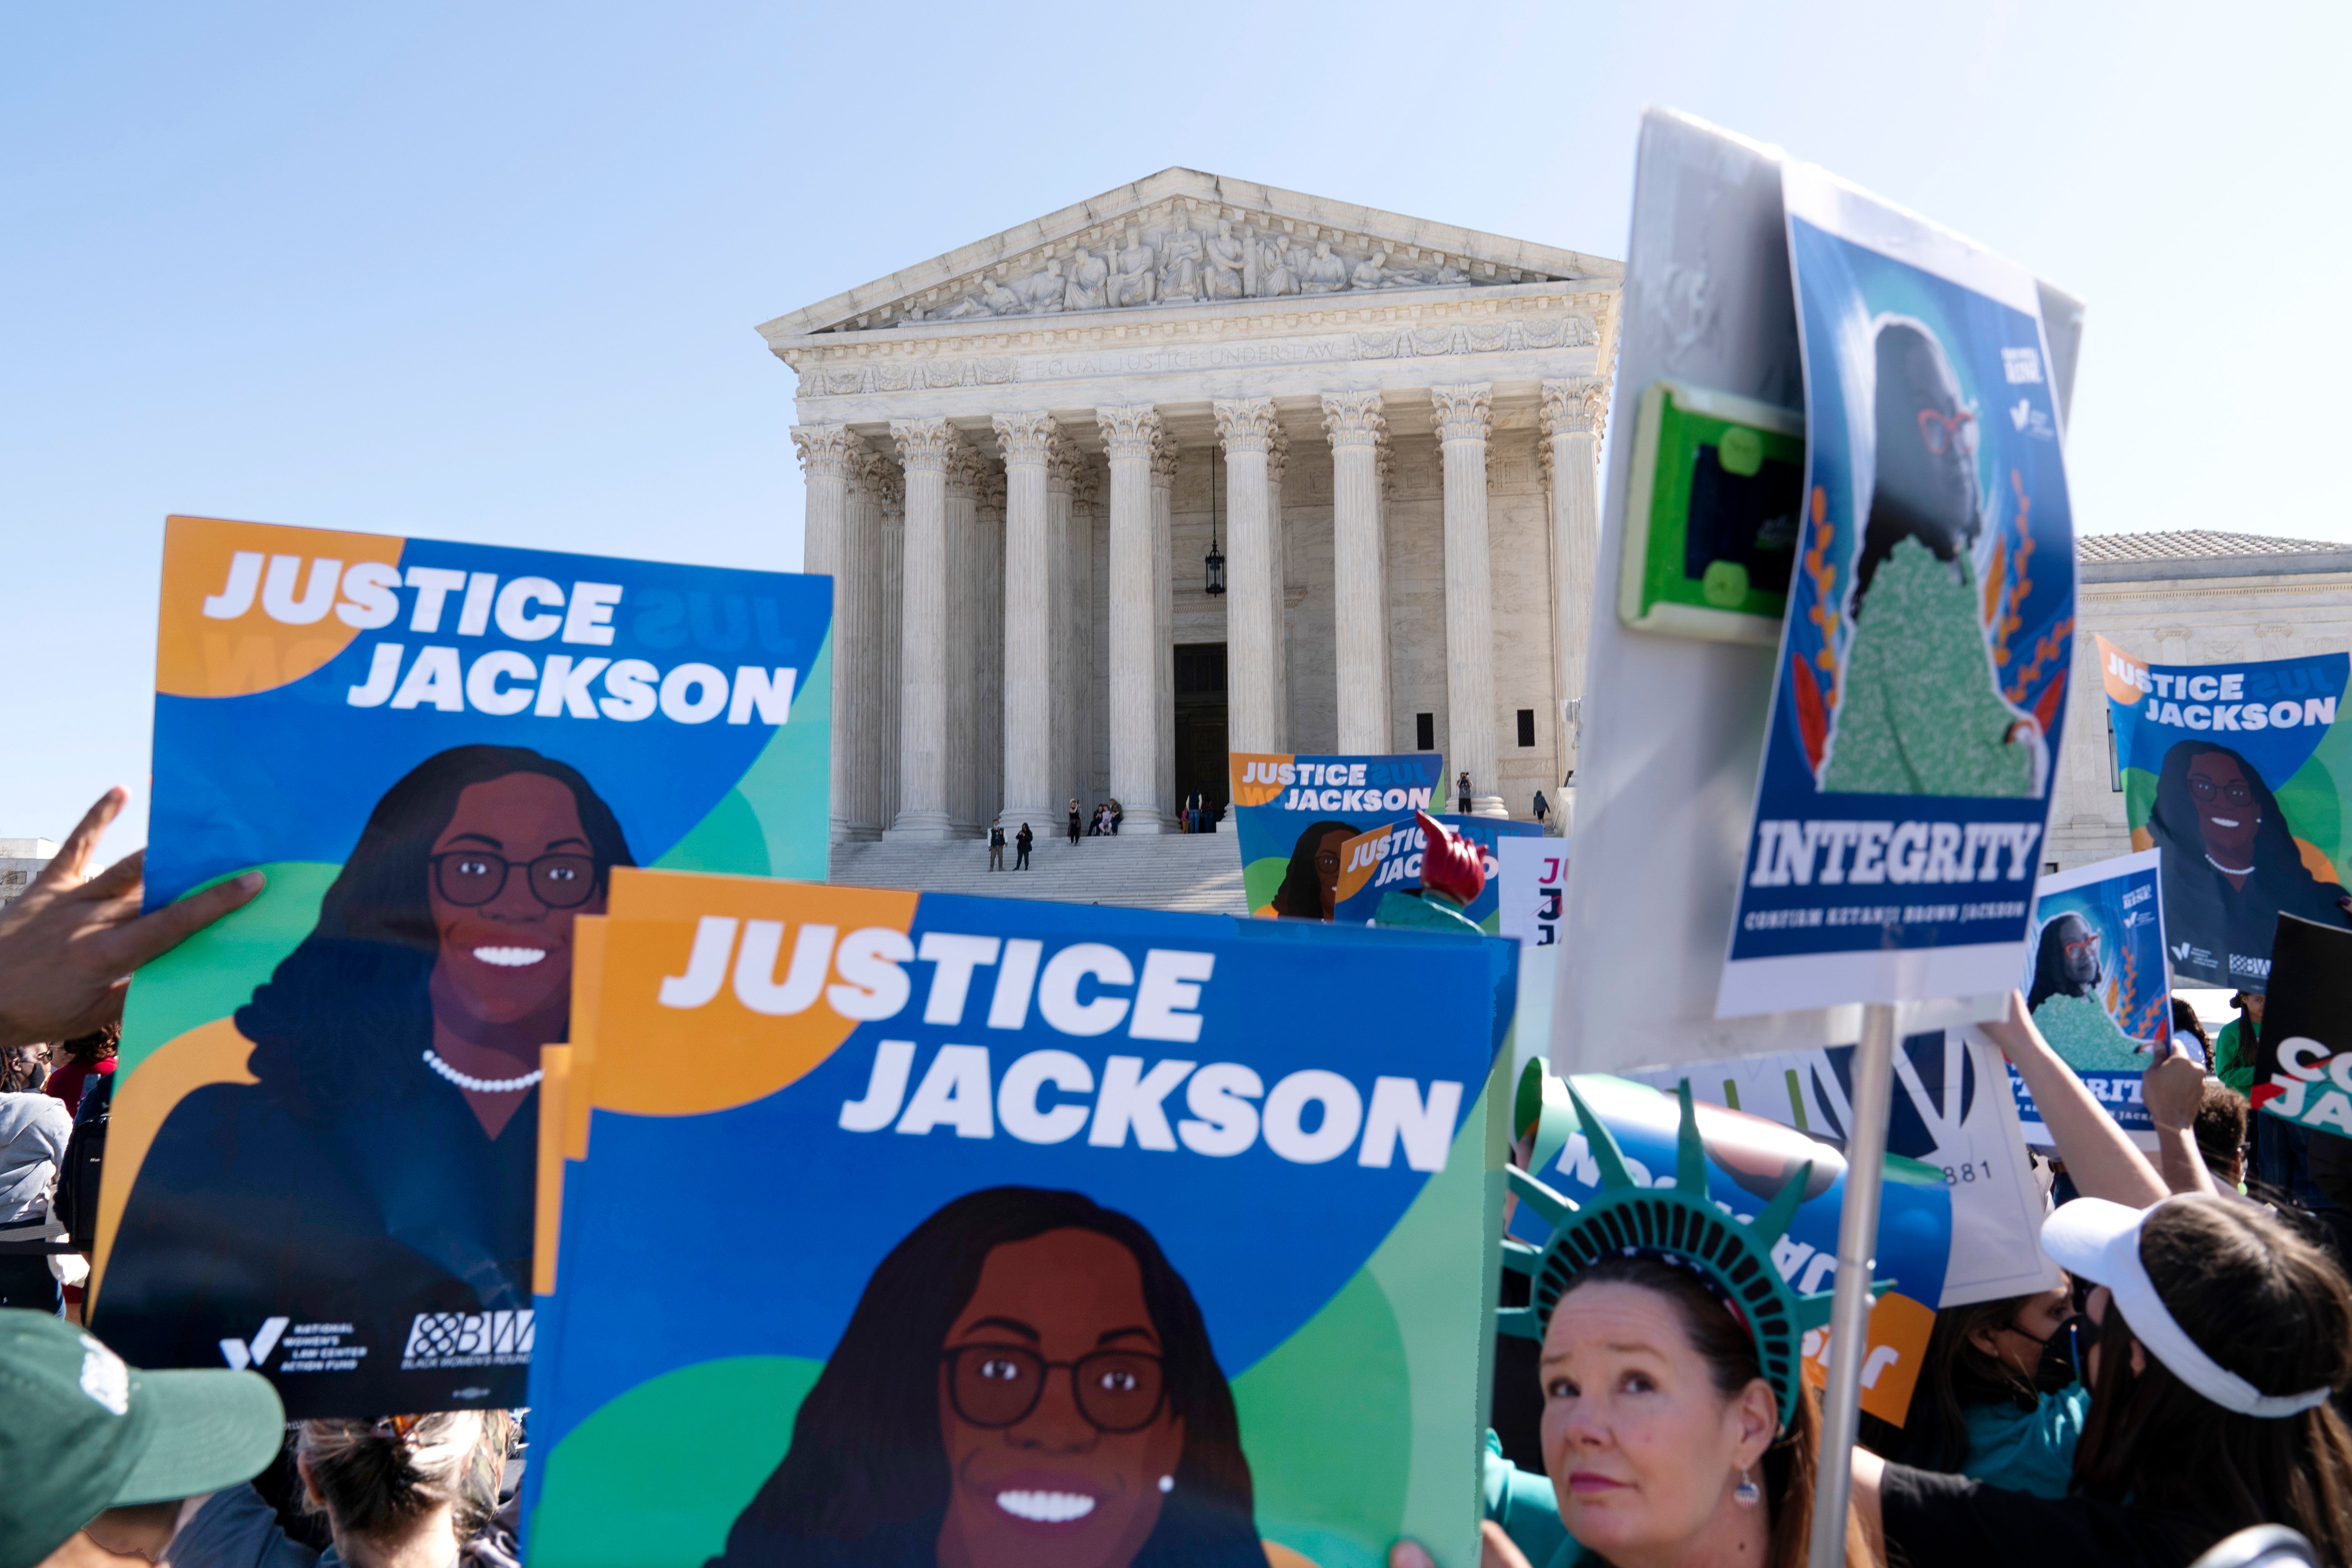 Demonstrators rally in Washington DC to support Ketanji Brown Jackson’s nomination to the US Supreme Court on 21 March, 2022.